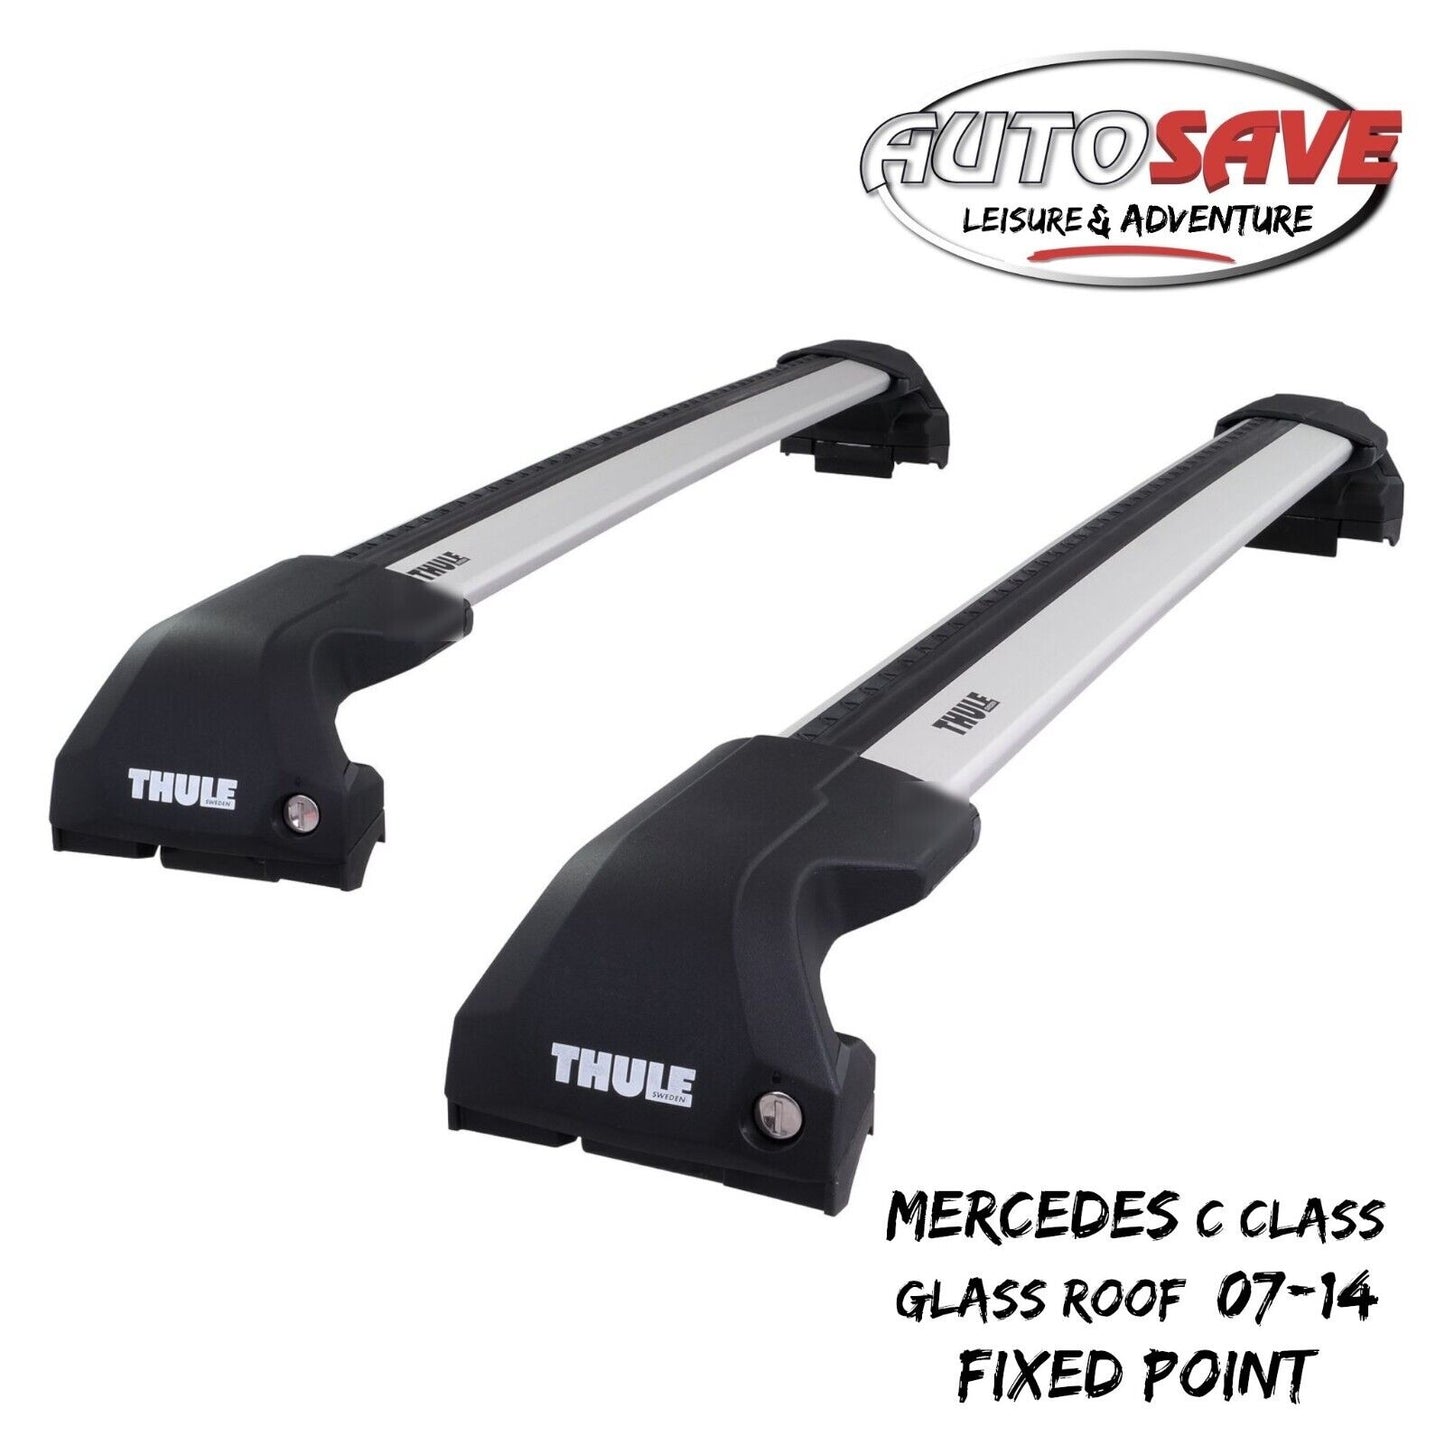 Thule WingBar Edge Silver Roof Bars Mercedes C Class With Glass Roof 07-14 Fixed